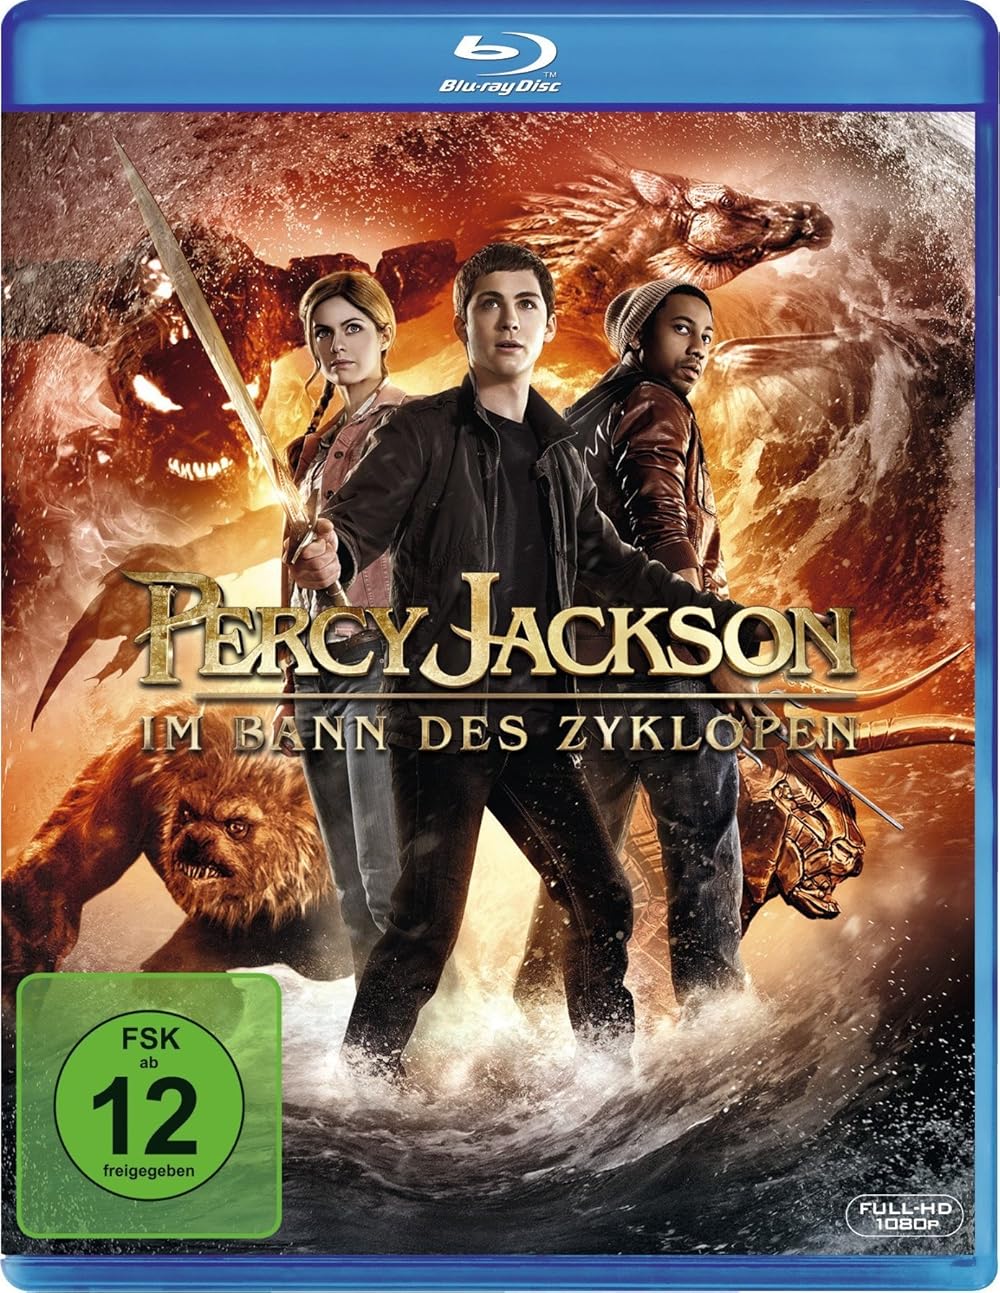 Percy Jackson: Sea of Monsters (2013) 448Kbps 23.976Fps 48Khz 5.1Ch BluRay Turkish Audio TAC